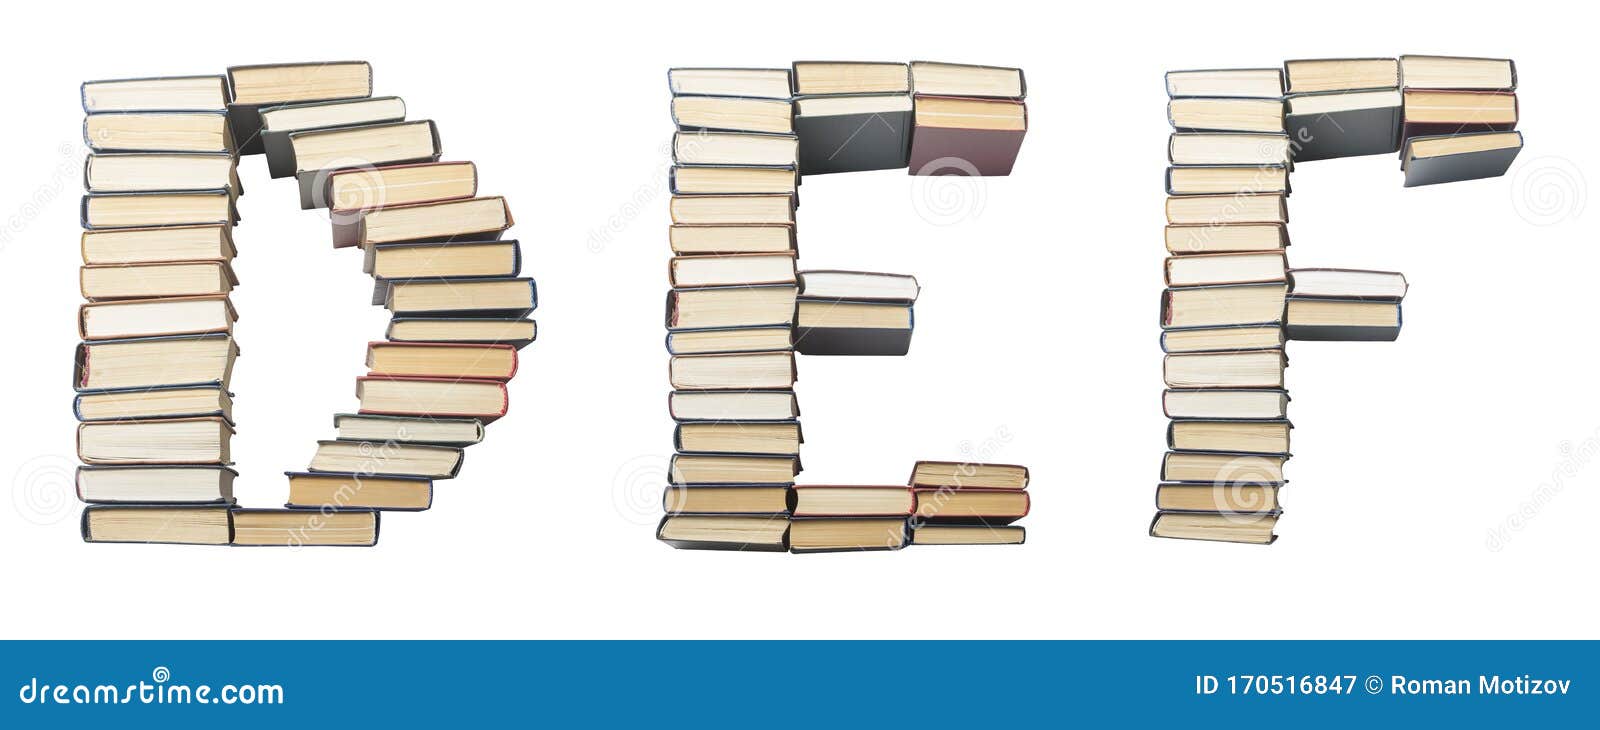 d e f letter from books. alphabet  on white background. font composed of spines of books